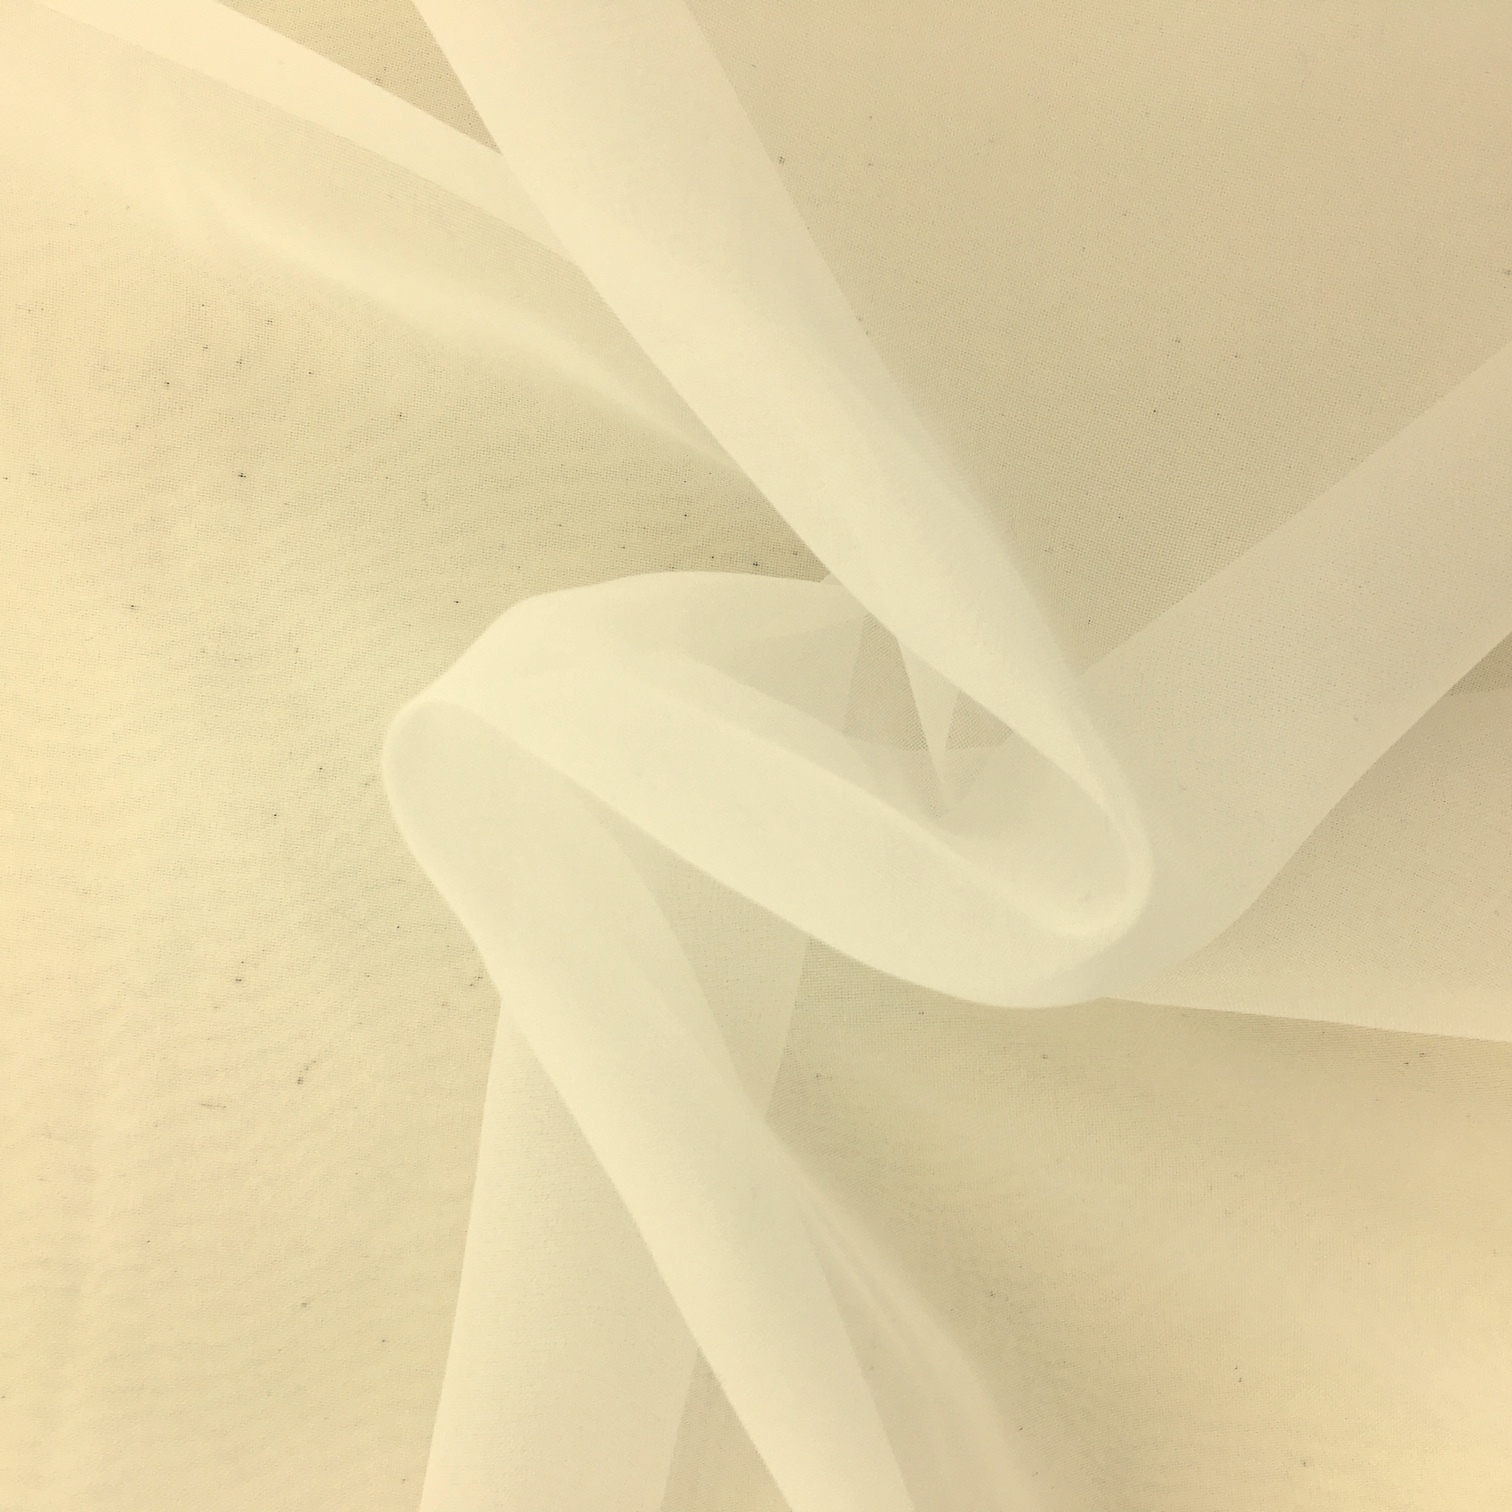 Voile Fabric | Voile Fabrics for Sale | Voile Materials | Voile Fabric UK